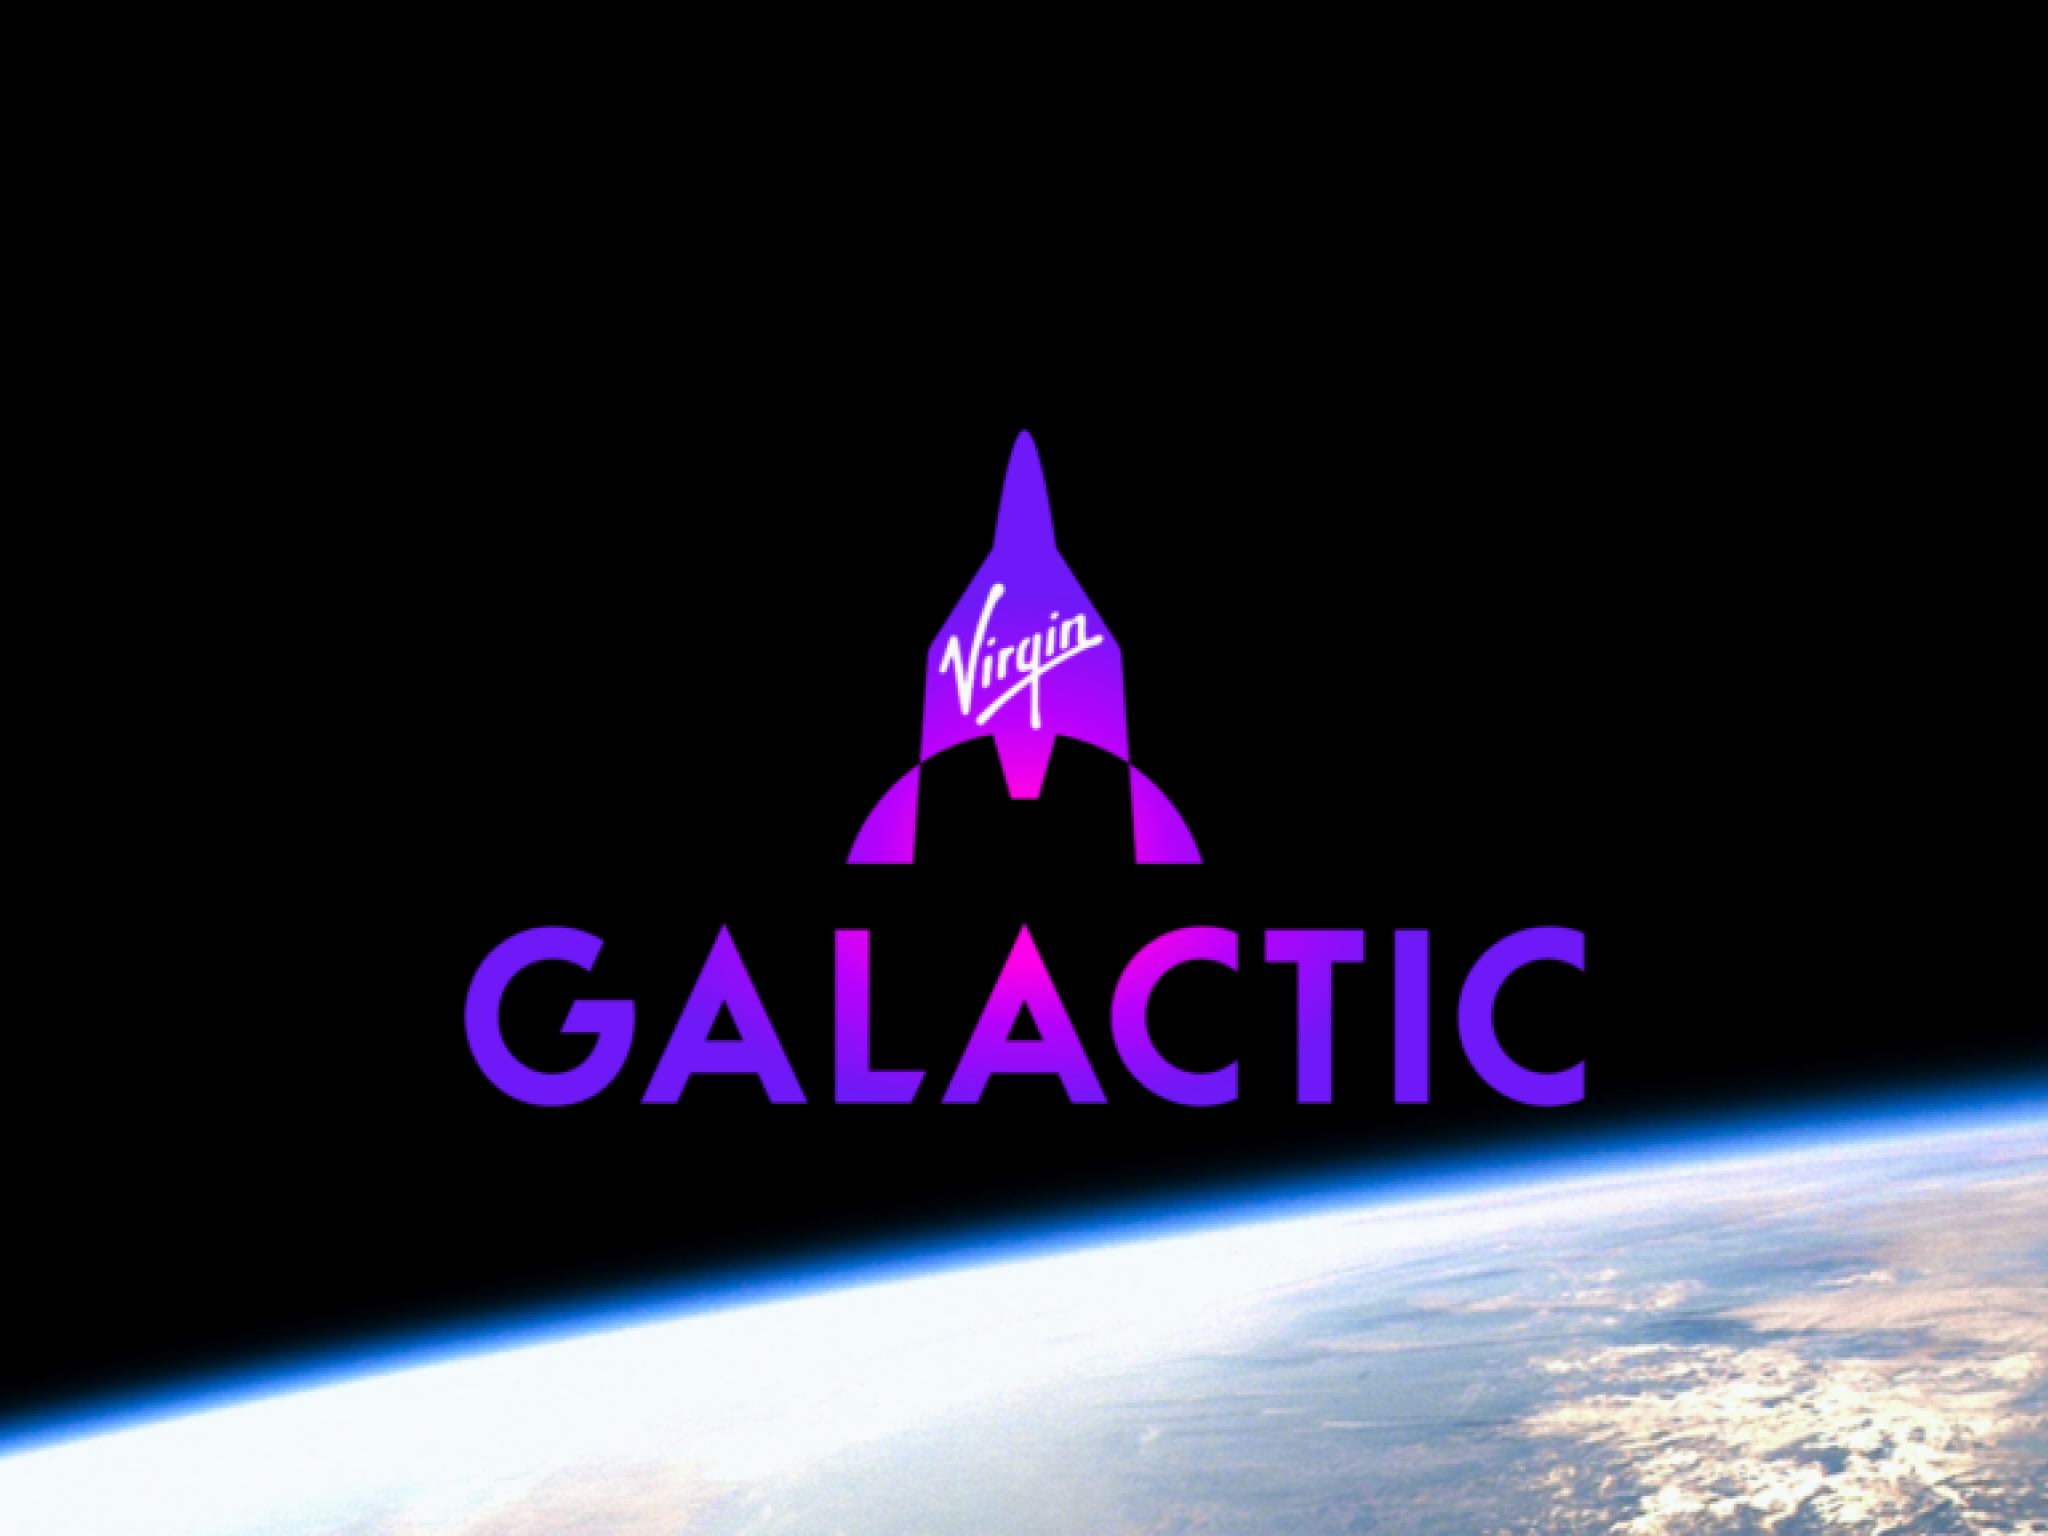  whats-going-on-with-virgin-galactic-stock-wednesday 